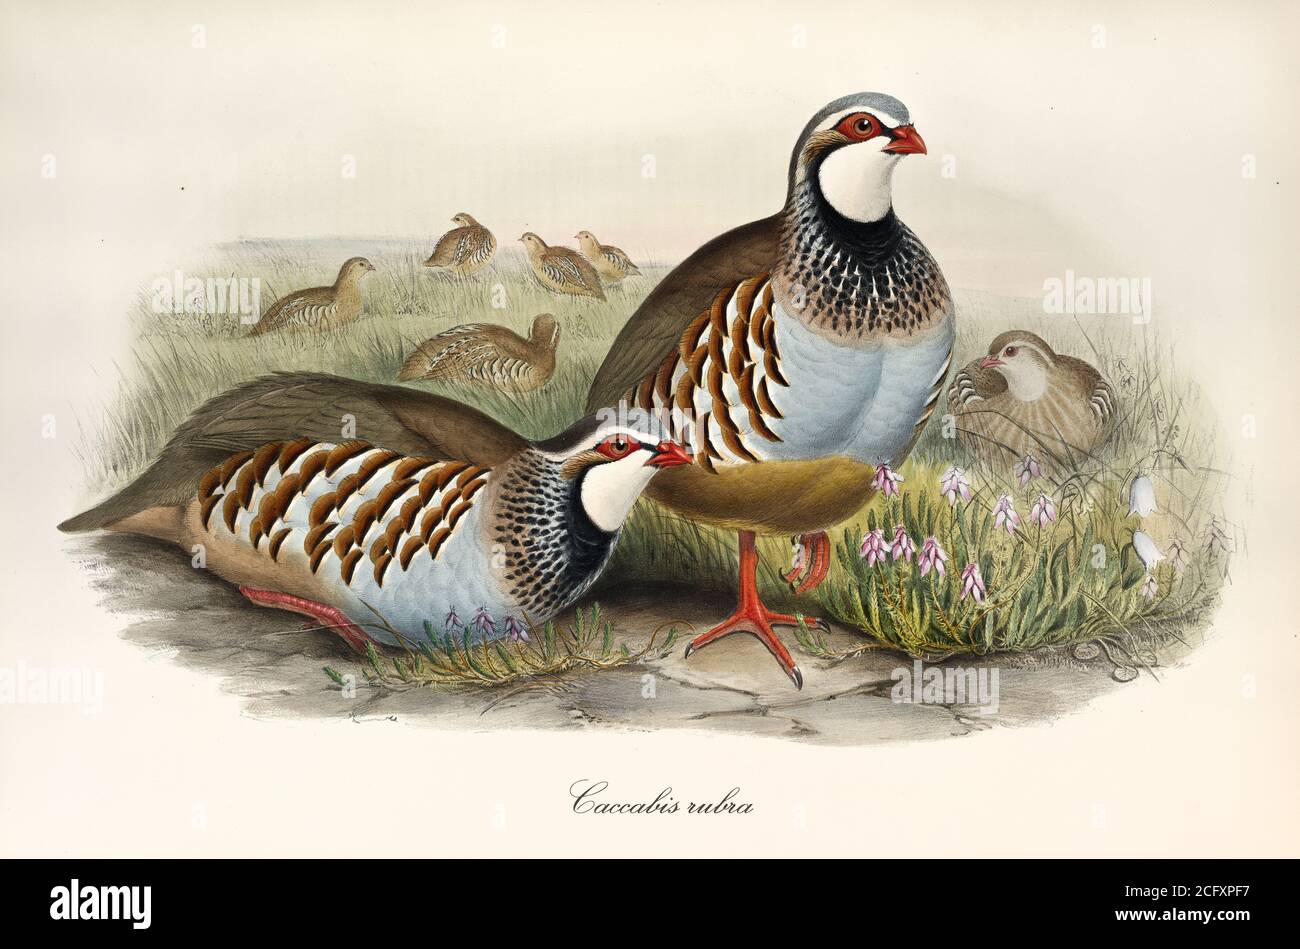 Couple of partridges and other exemplars the grass. Vintage style art of Red-Legged Patridge (Alectoris rufa). By John Gould London 1862 – 1873 Stock Photo